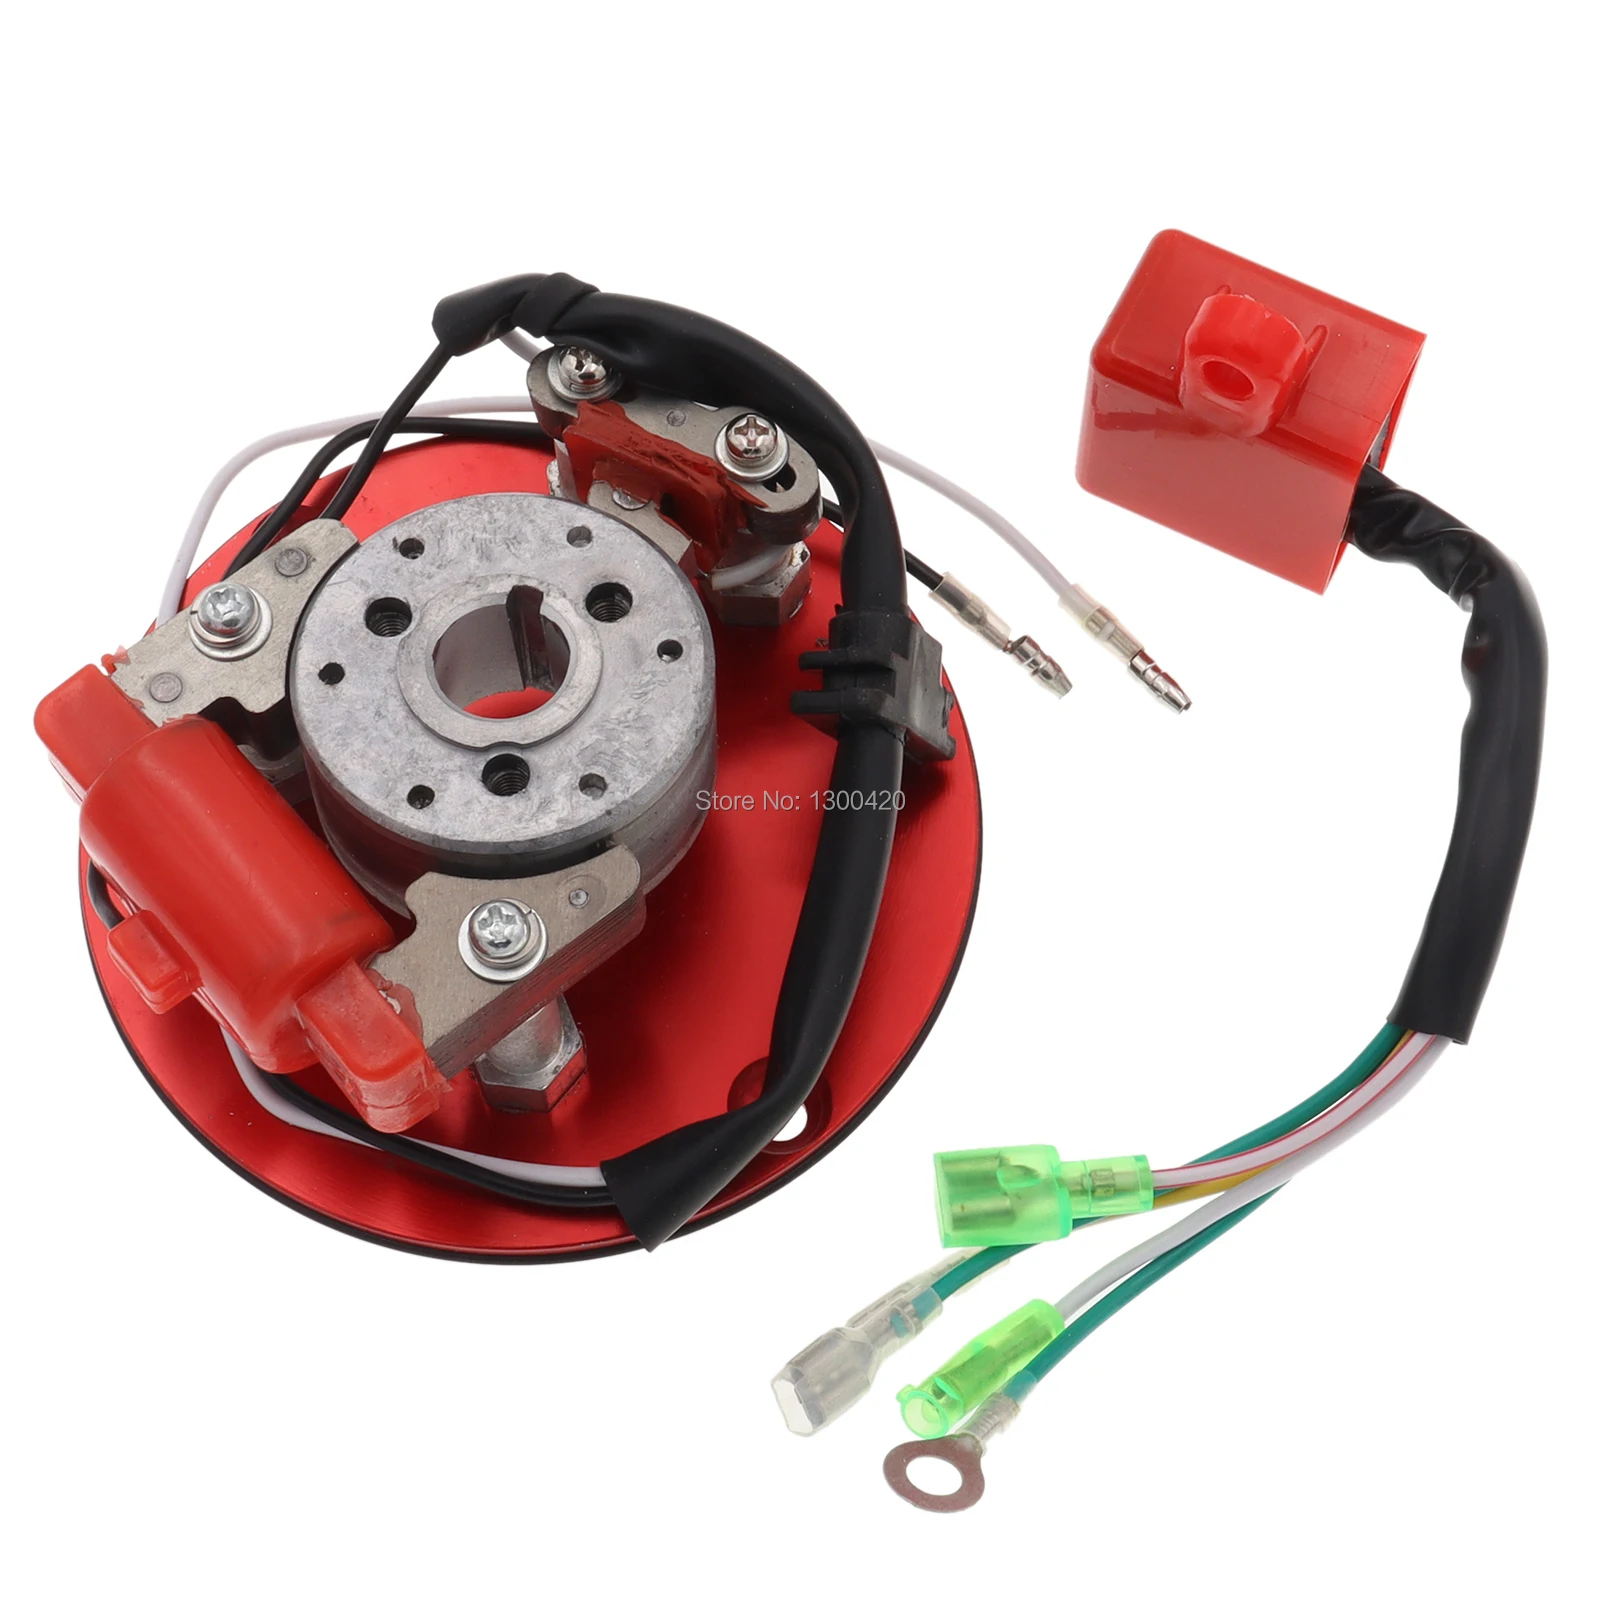 1 Pc High Performance Racing Motorcycle Magneto Stator Rotor CDI Fit for Chinese 110cc 125cc 140cc Lifan YX Engine Pit Dirt Bike 